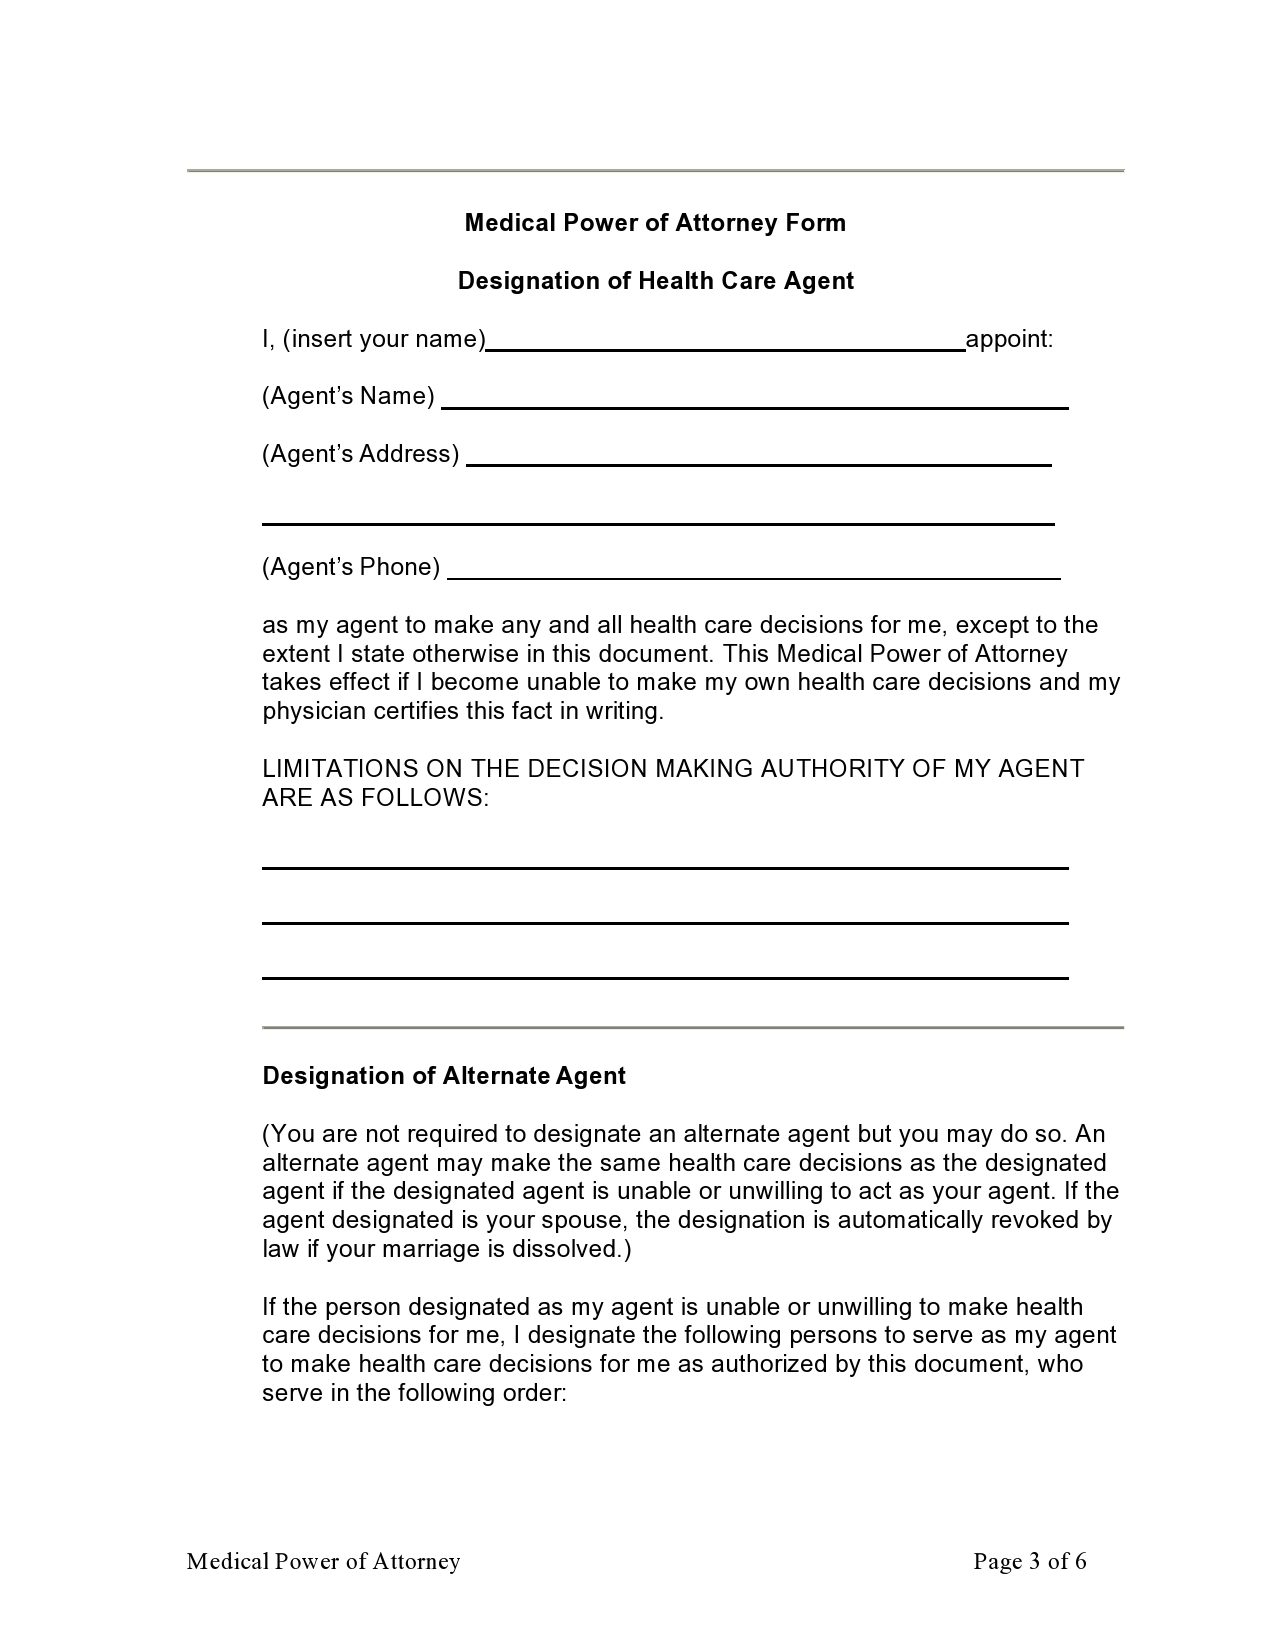 Free medical power of attorney 19